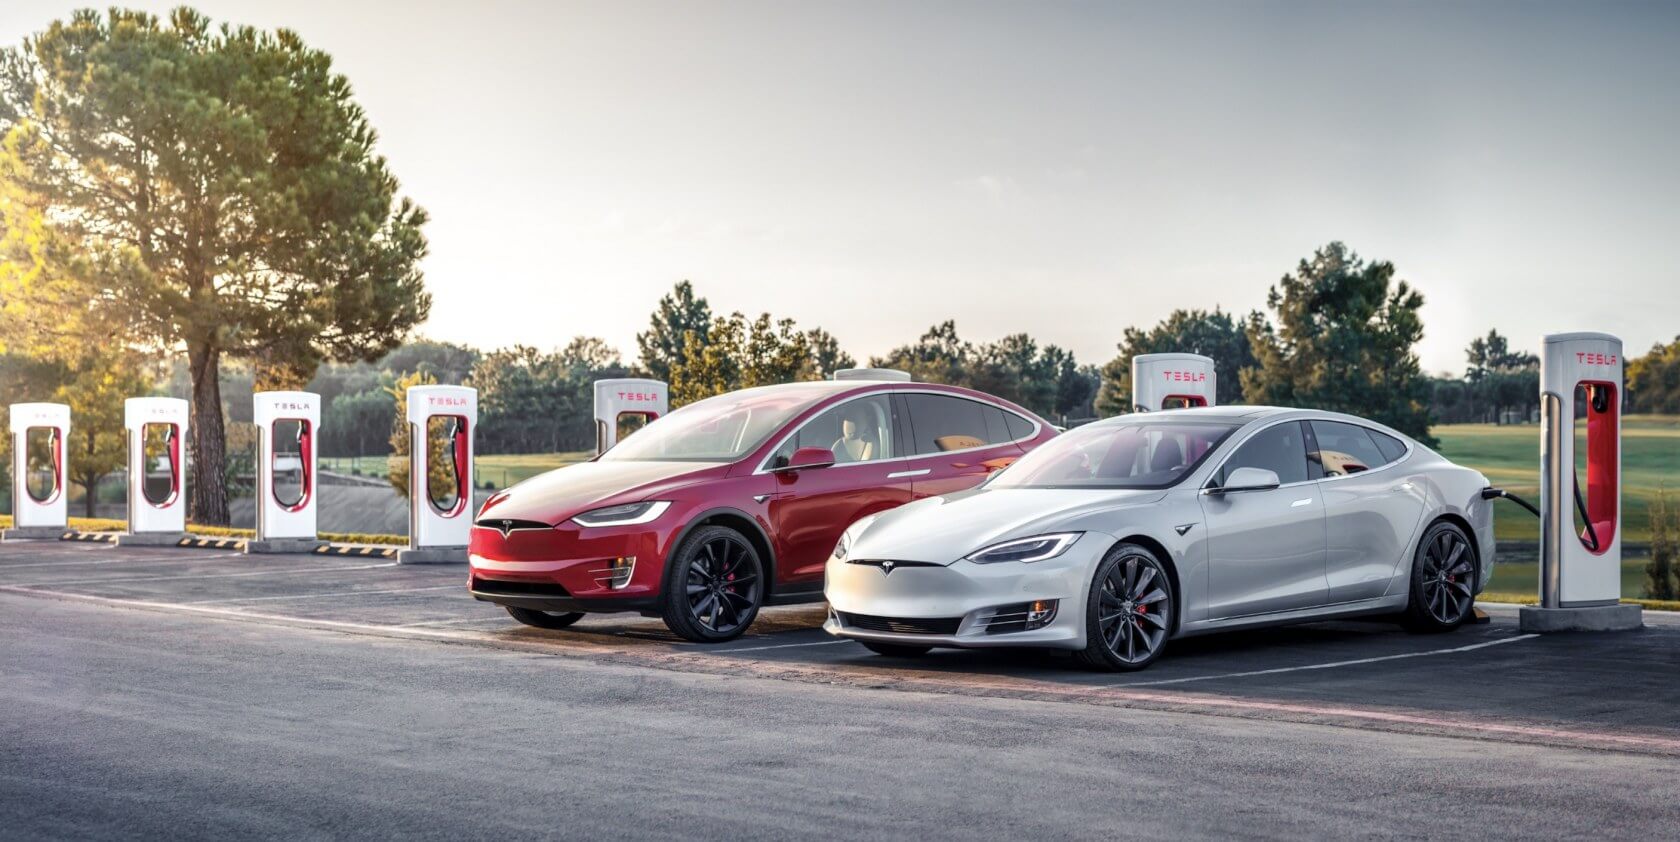 Tesla rolls out new Model S and X cars with software-locked batteries